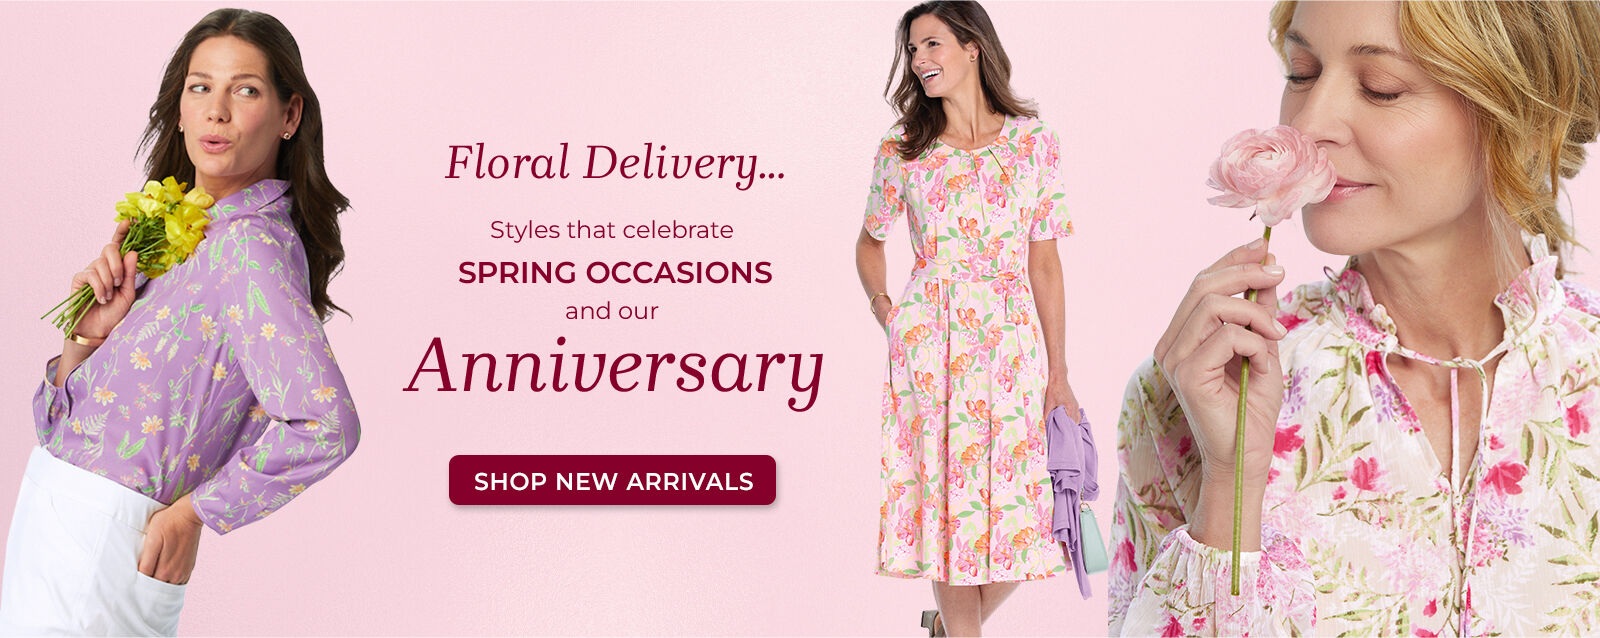 floral delivery... styles that celebrate spring occasions and our anniversary shop new arrivals